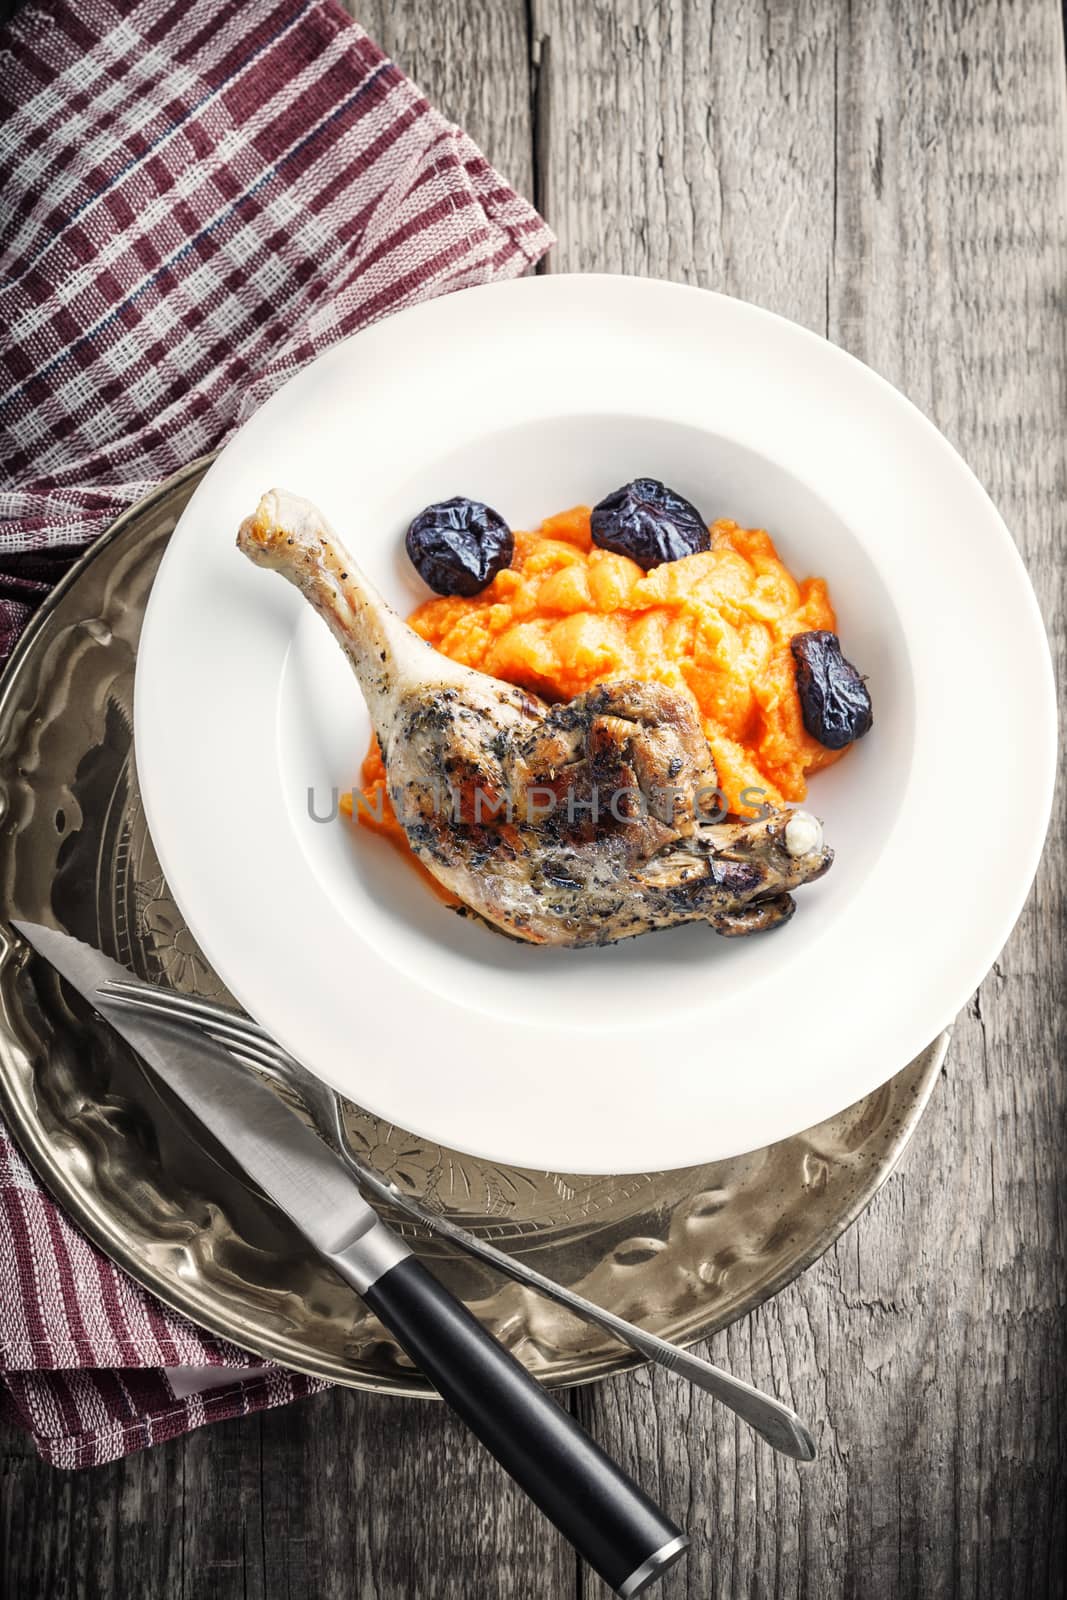 Roasted duck leg with mashed carrot and dried prunes.